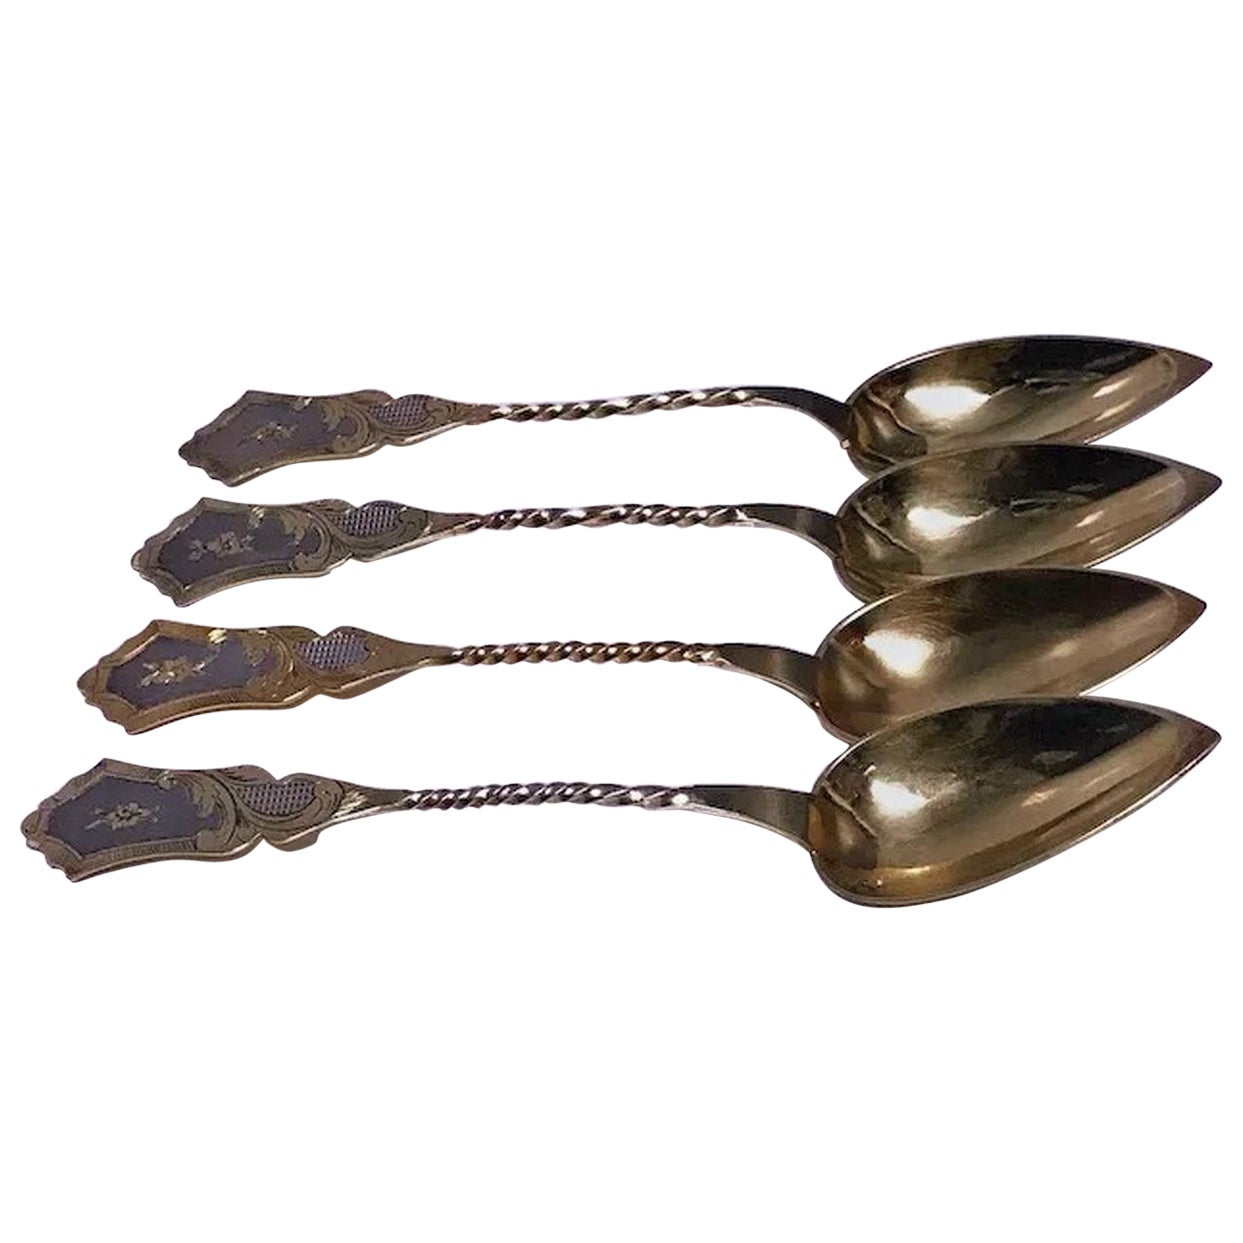 Set of 4 French Silver with vermeil Spoons, Paris C. 1850 by Phillipe Berthier